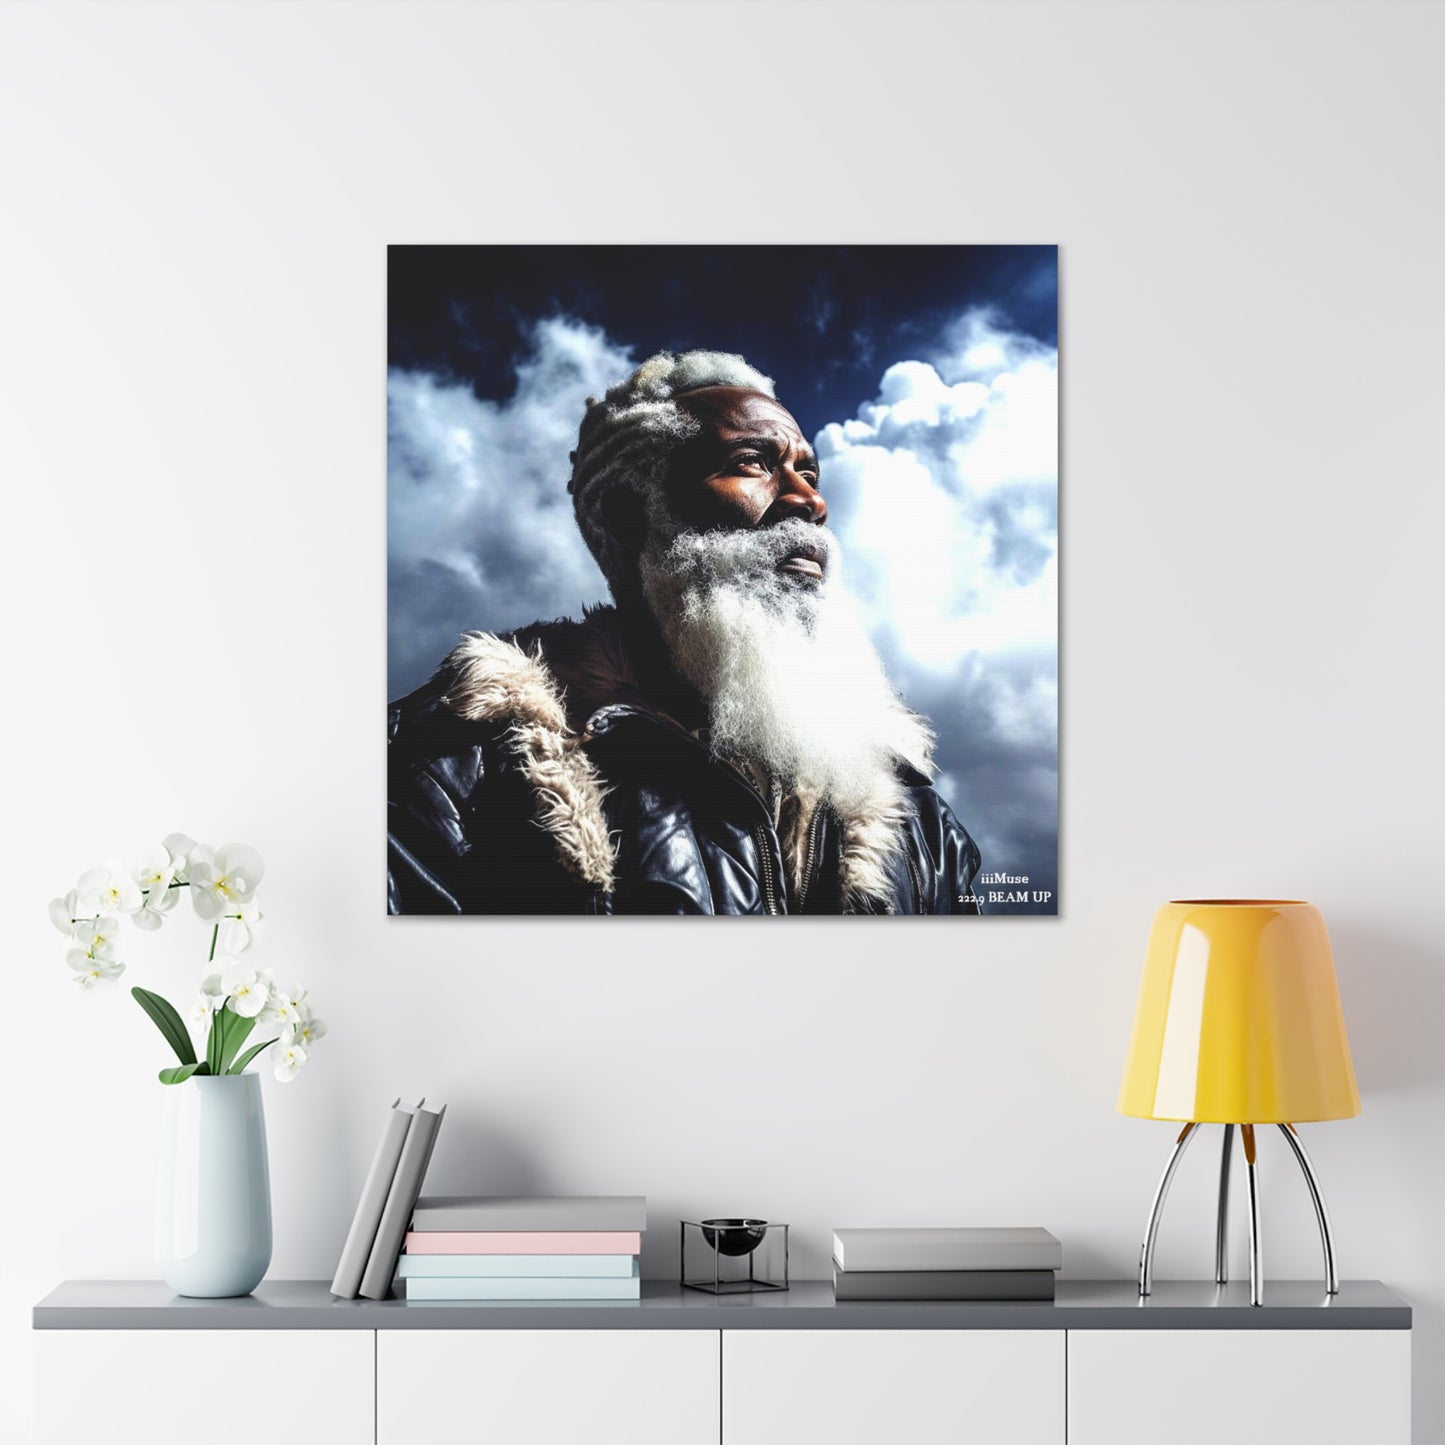 Obatala in Real Time - A Gallery Canvas